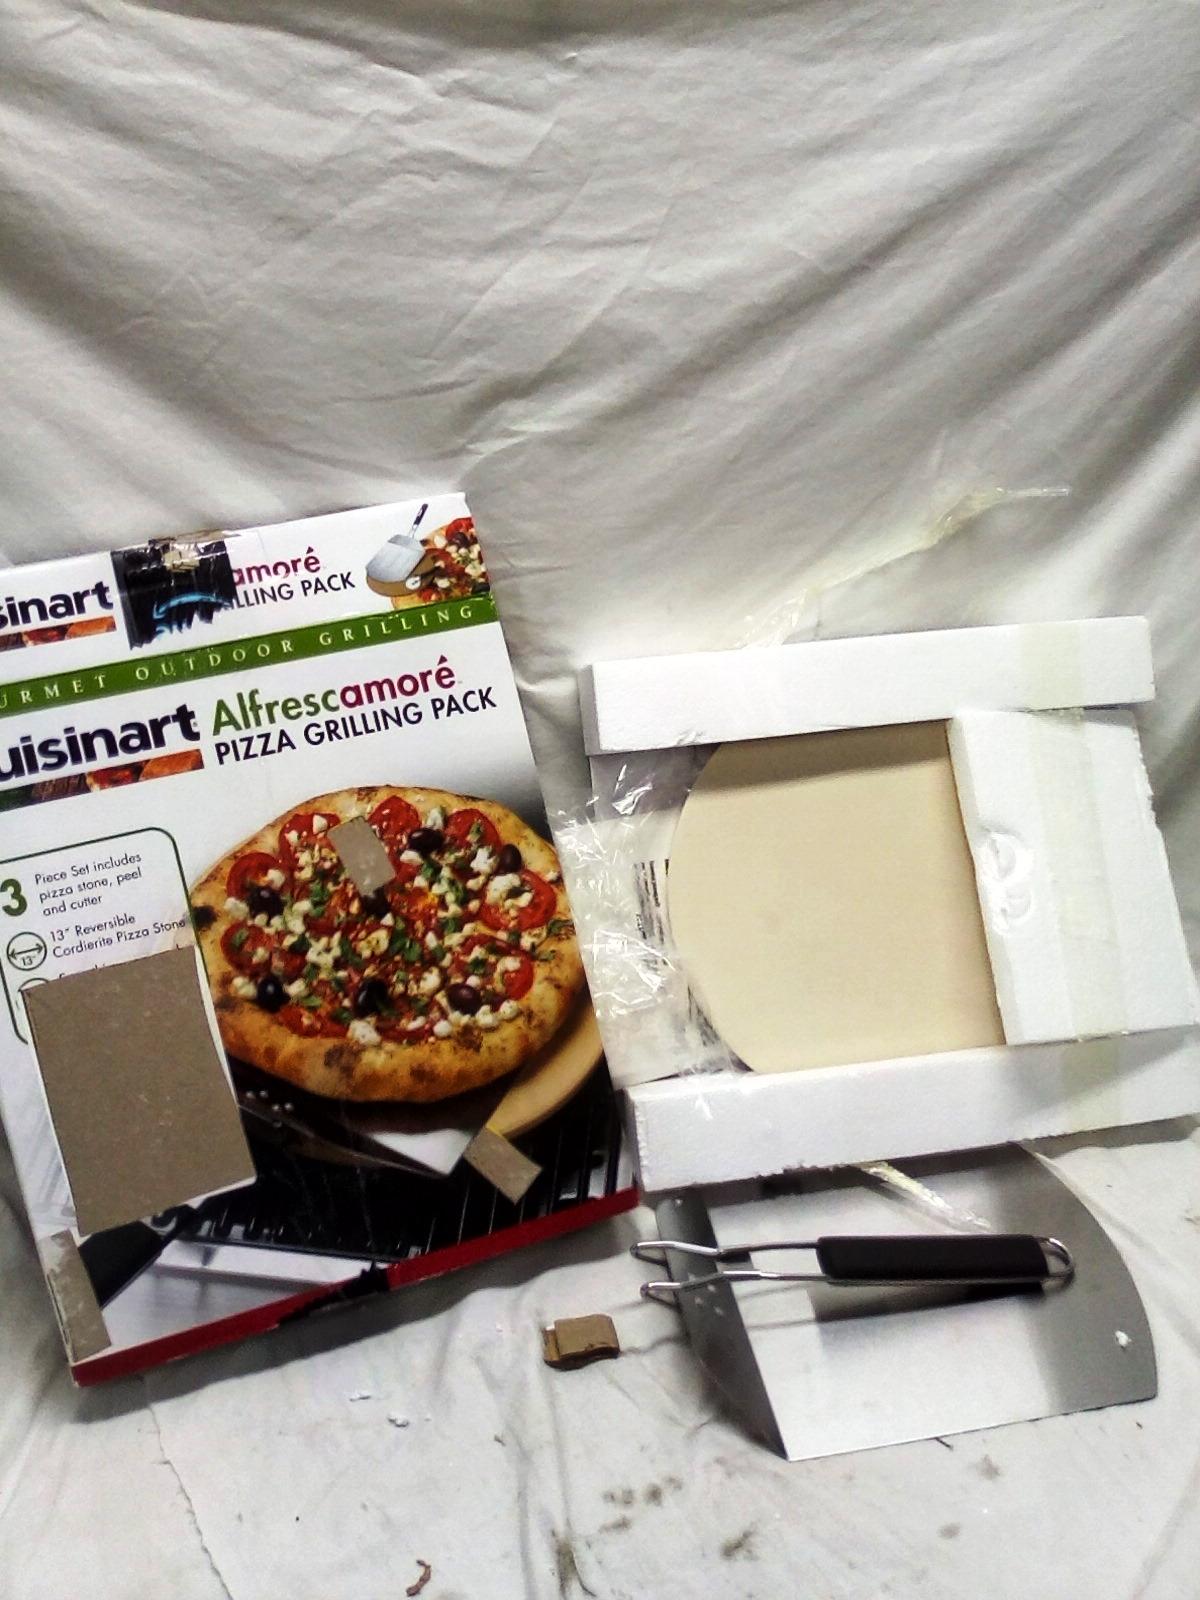 Cuisinart Alfrescamore Pizza Grilling Pack includes stone peel and cutter